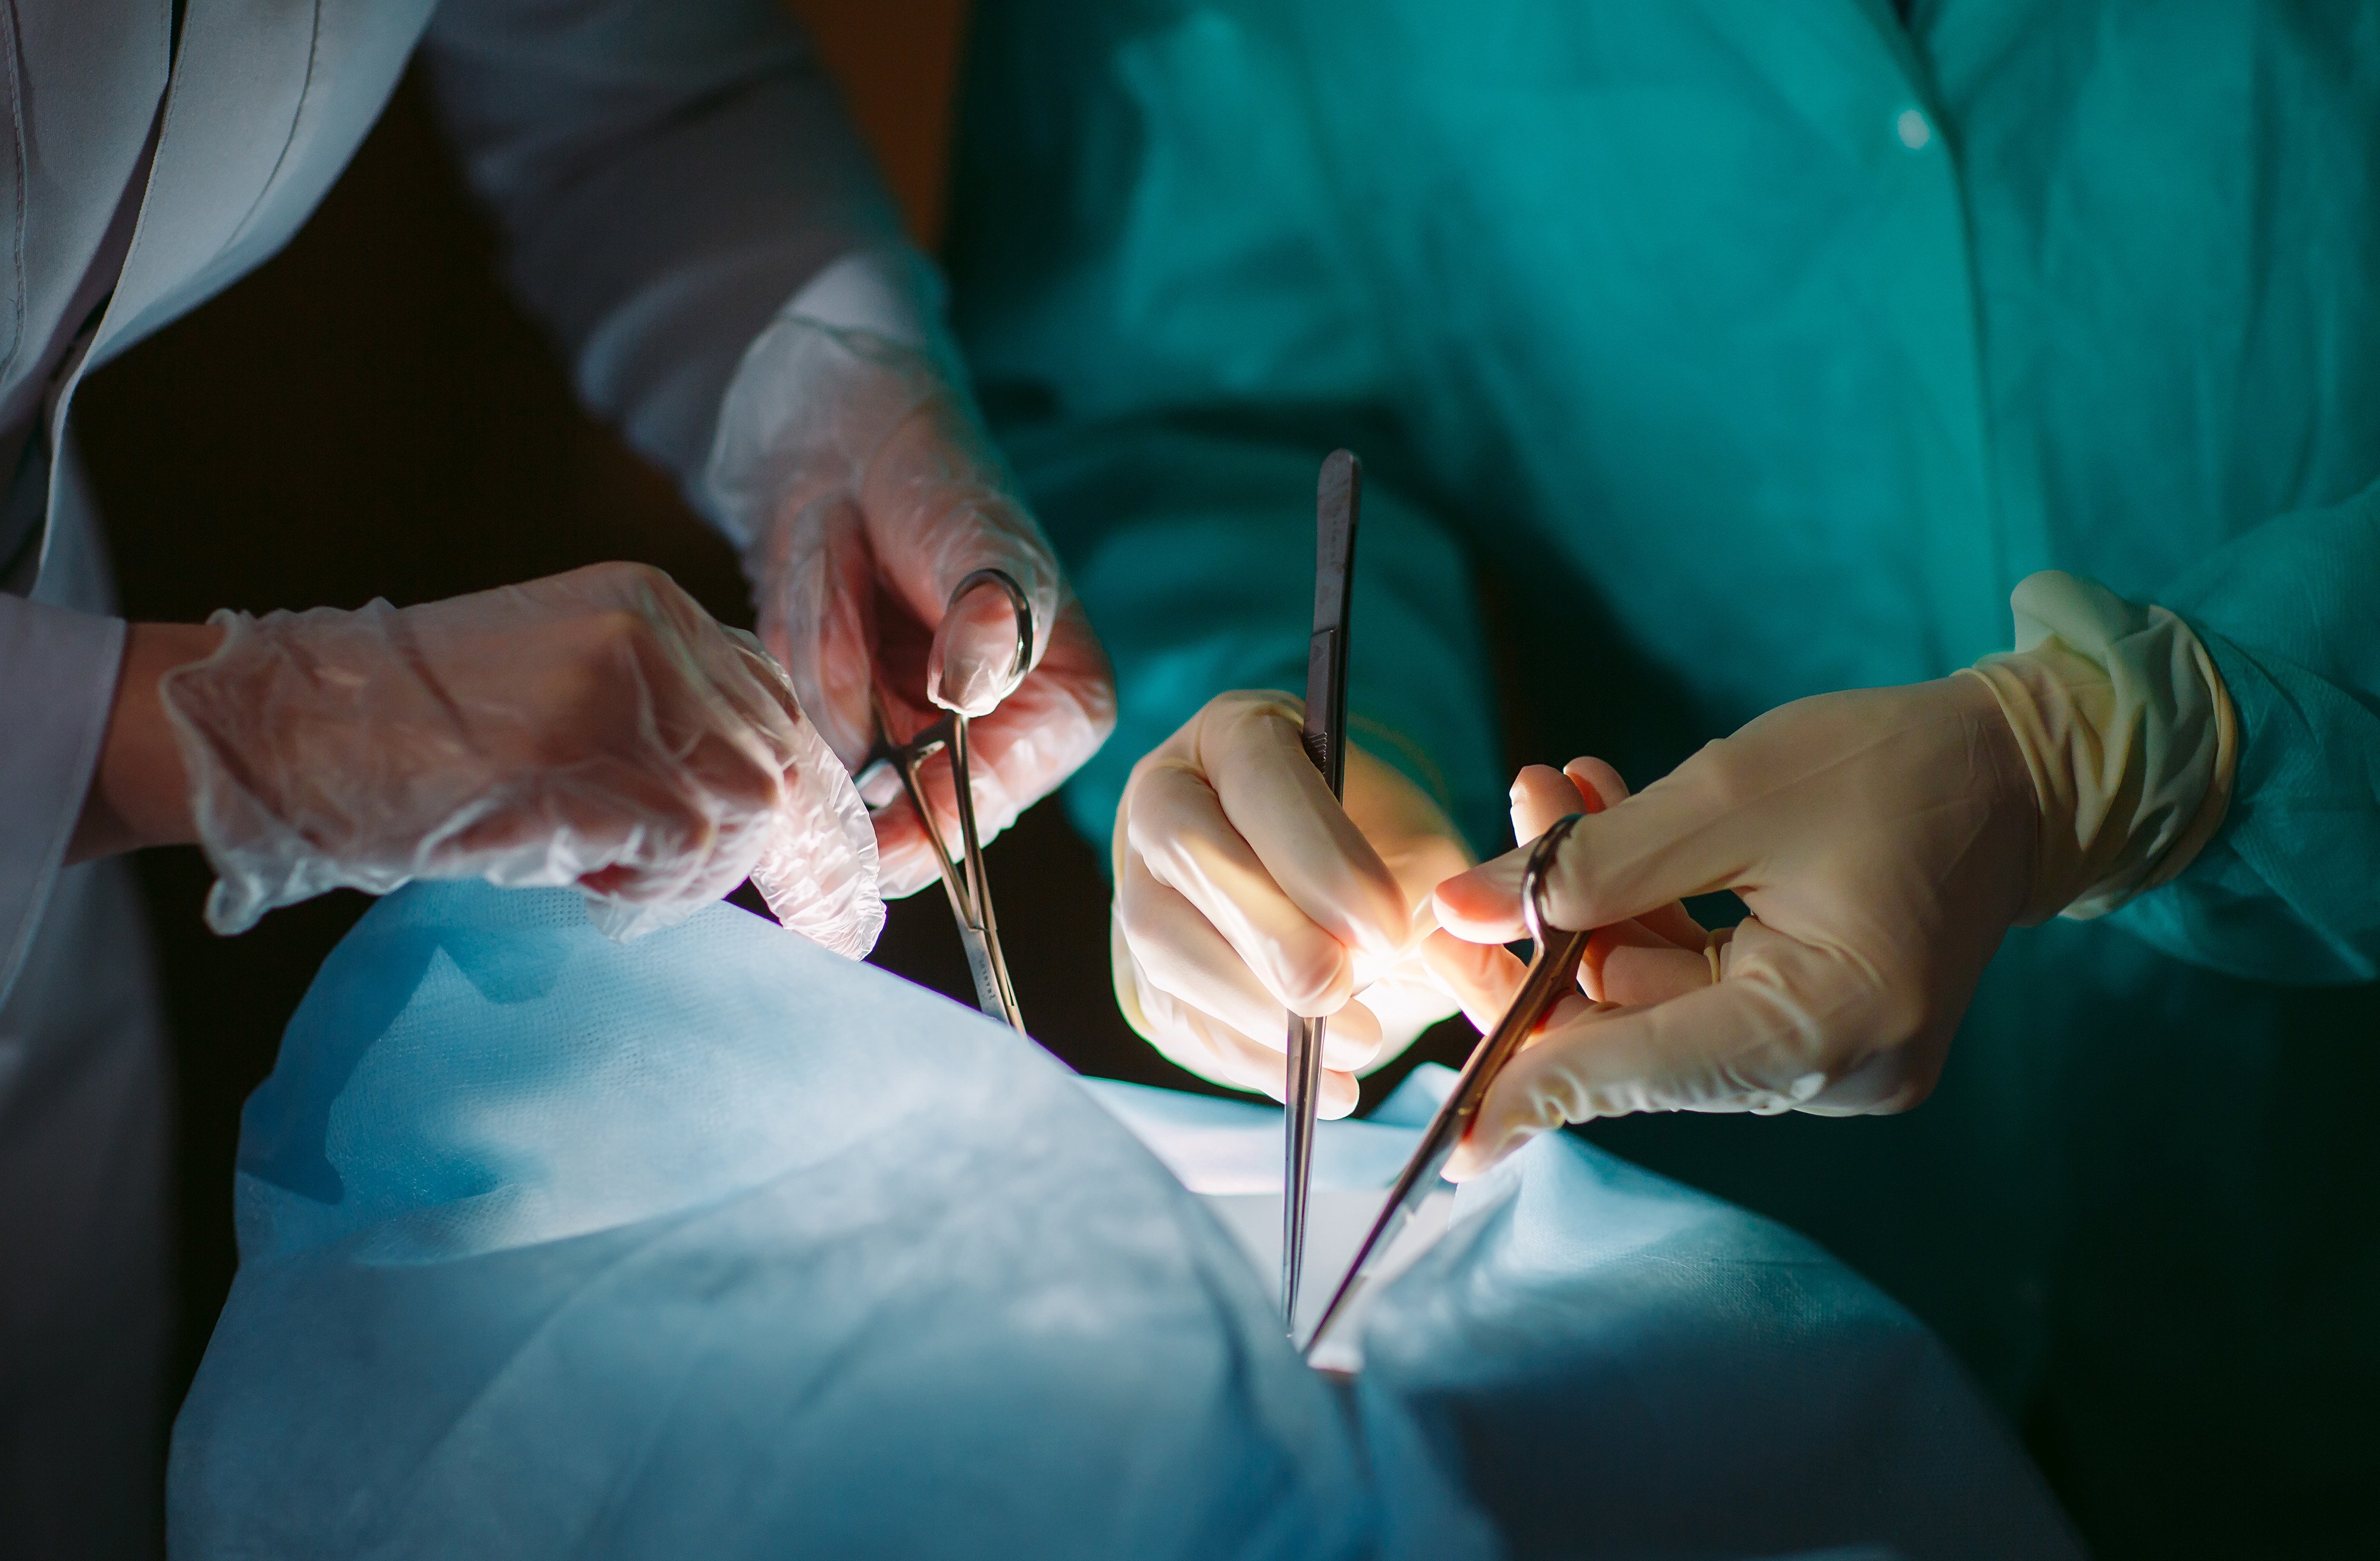 A Bangladeshi businessman has sued a surgeon in Singapore over a procedure that allegedly left him paralysed. Photo: Shutterstock